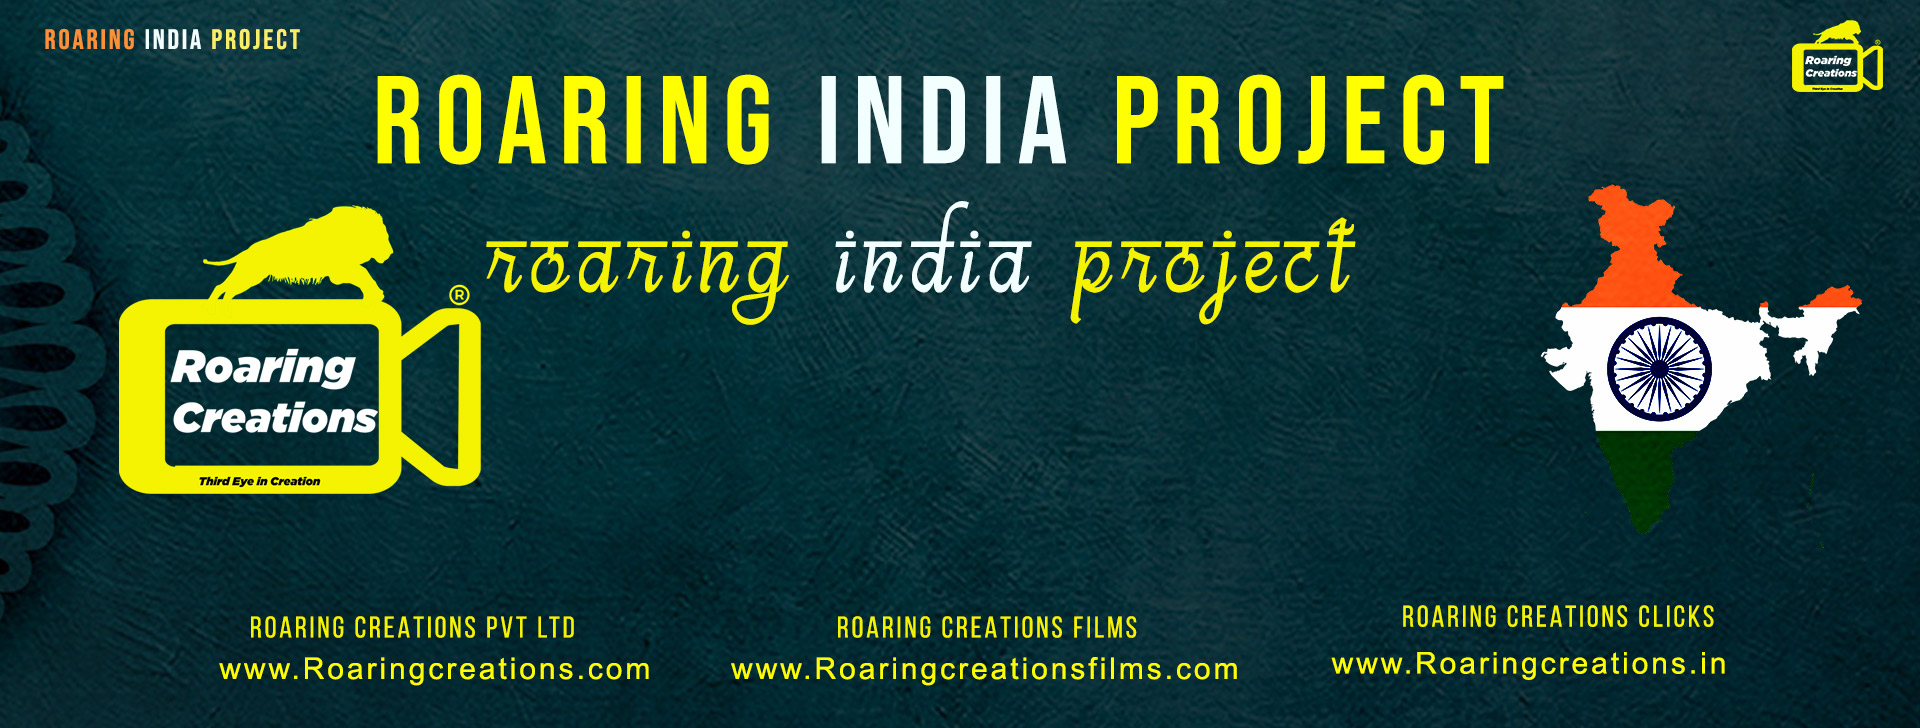 Roaring India project